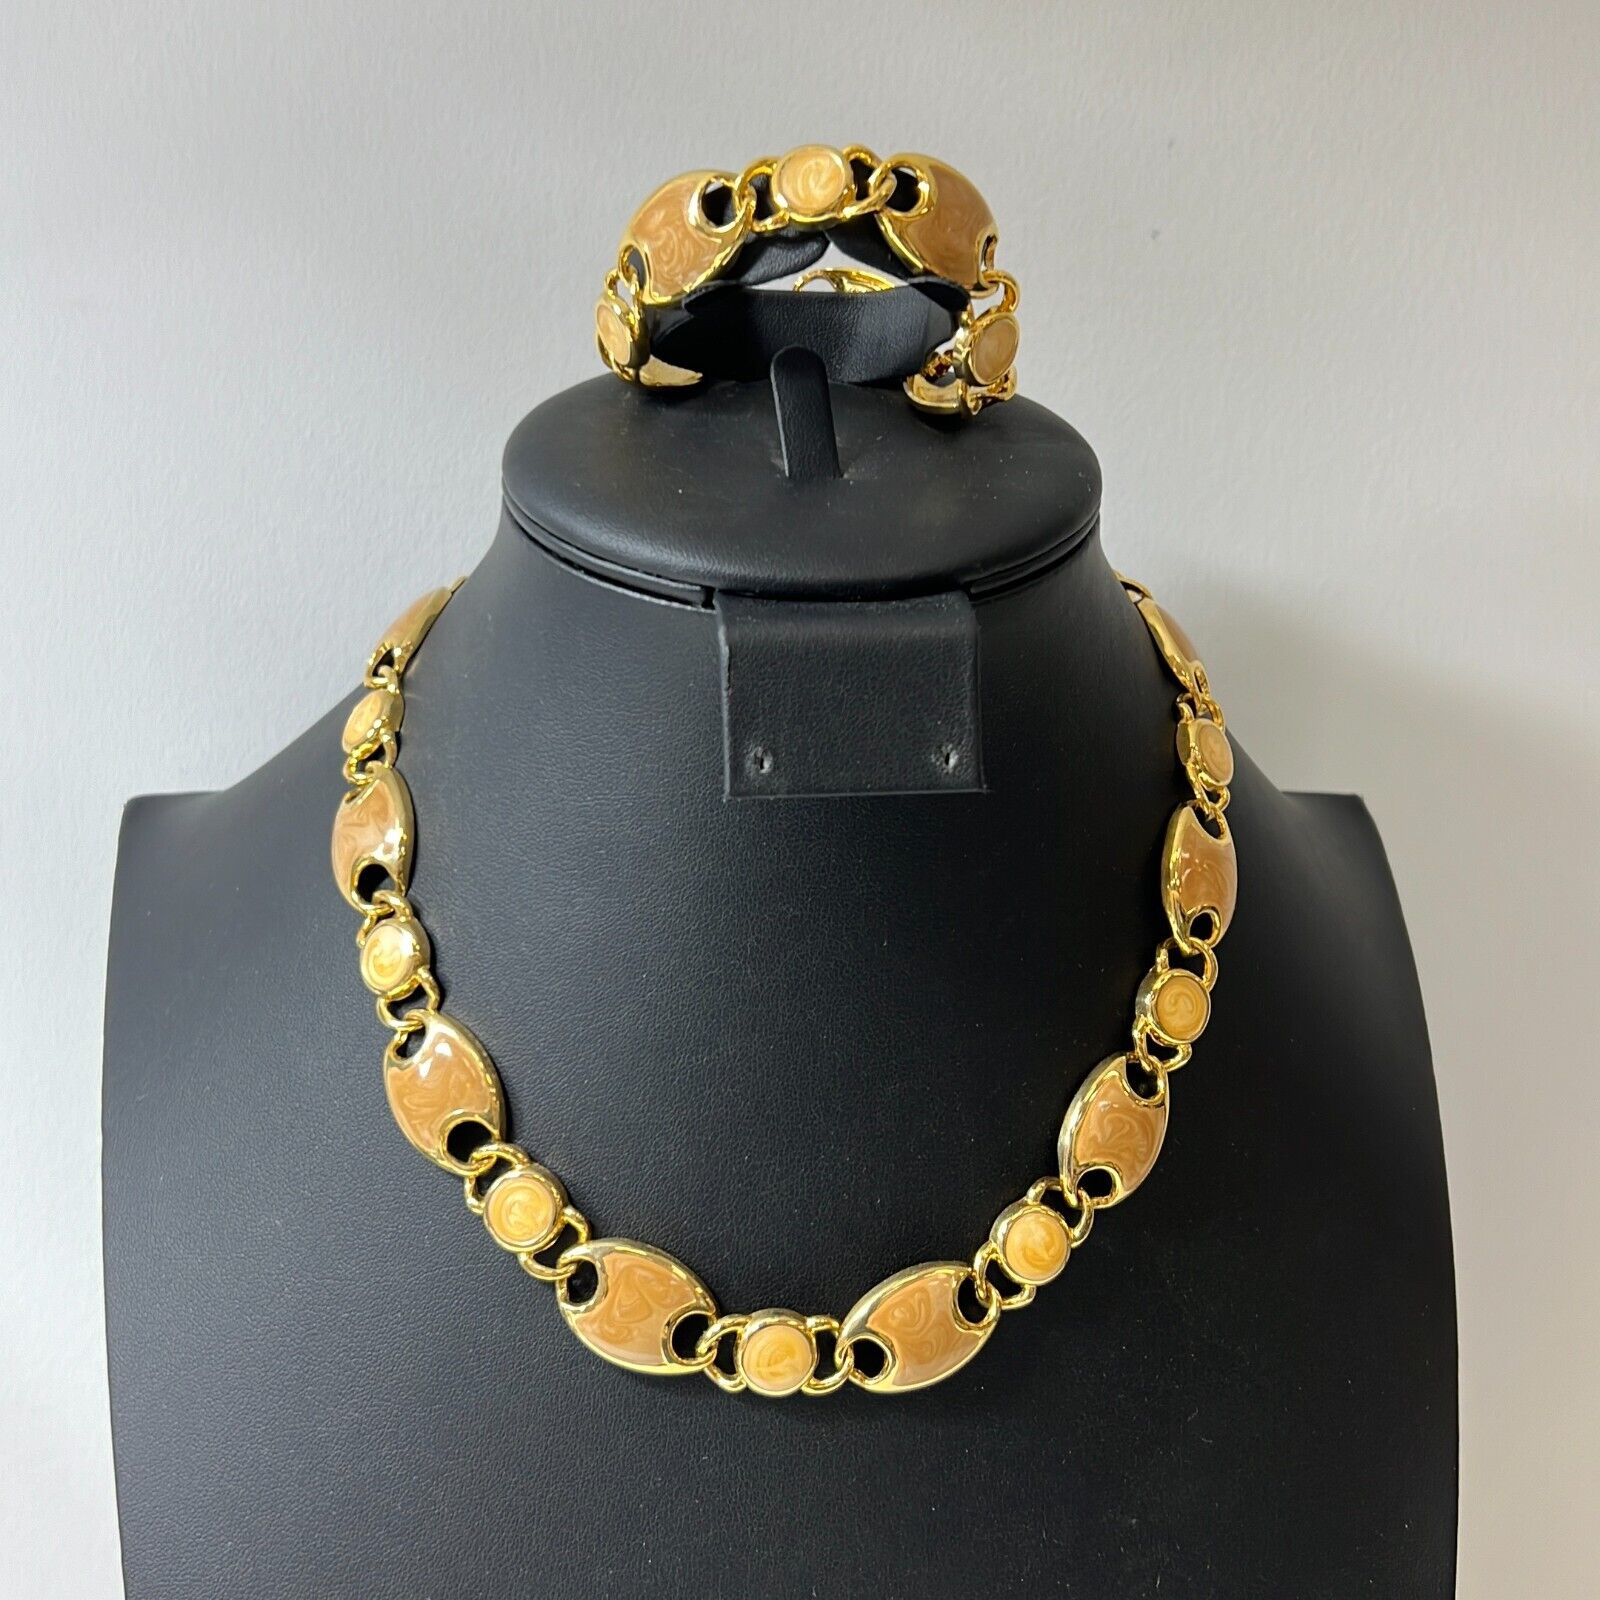 Gold Tone Costume Enamel Chain Bracelet And Necklace Jewelry Set